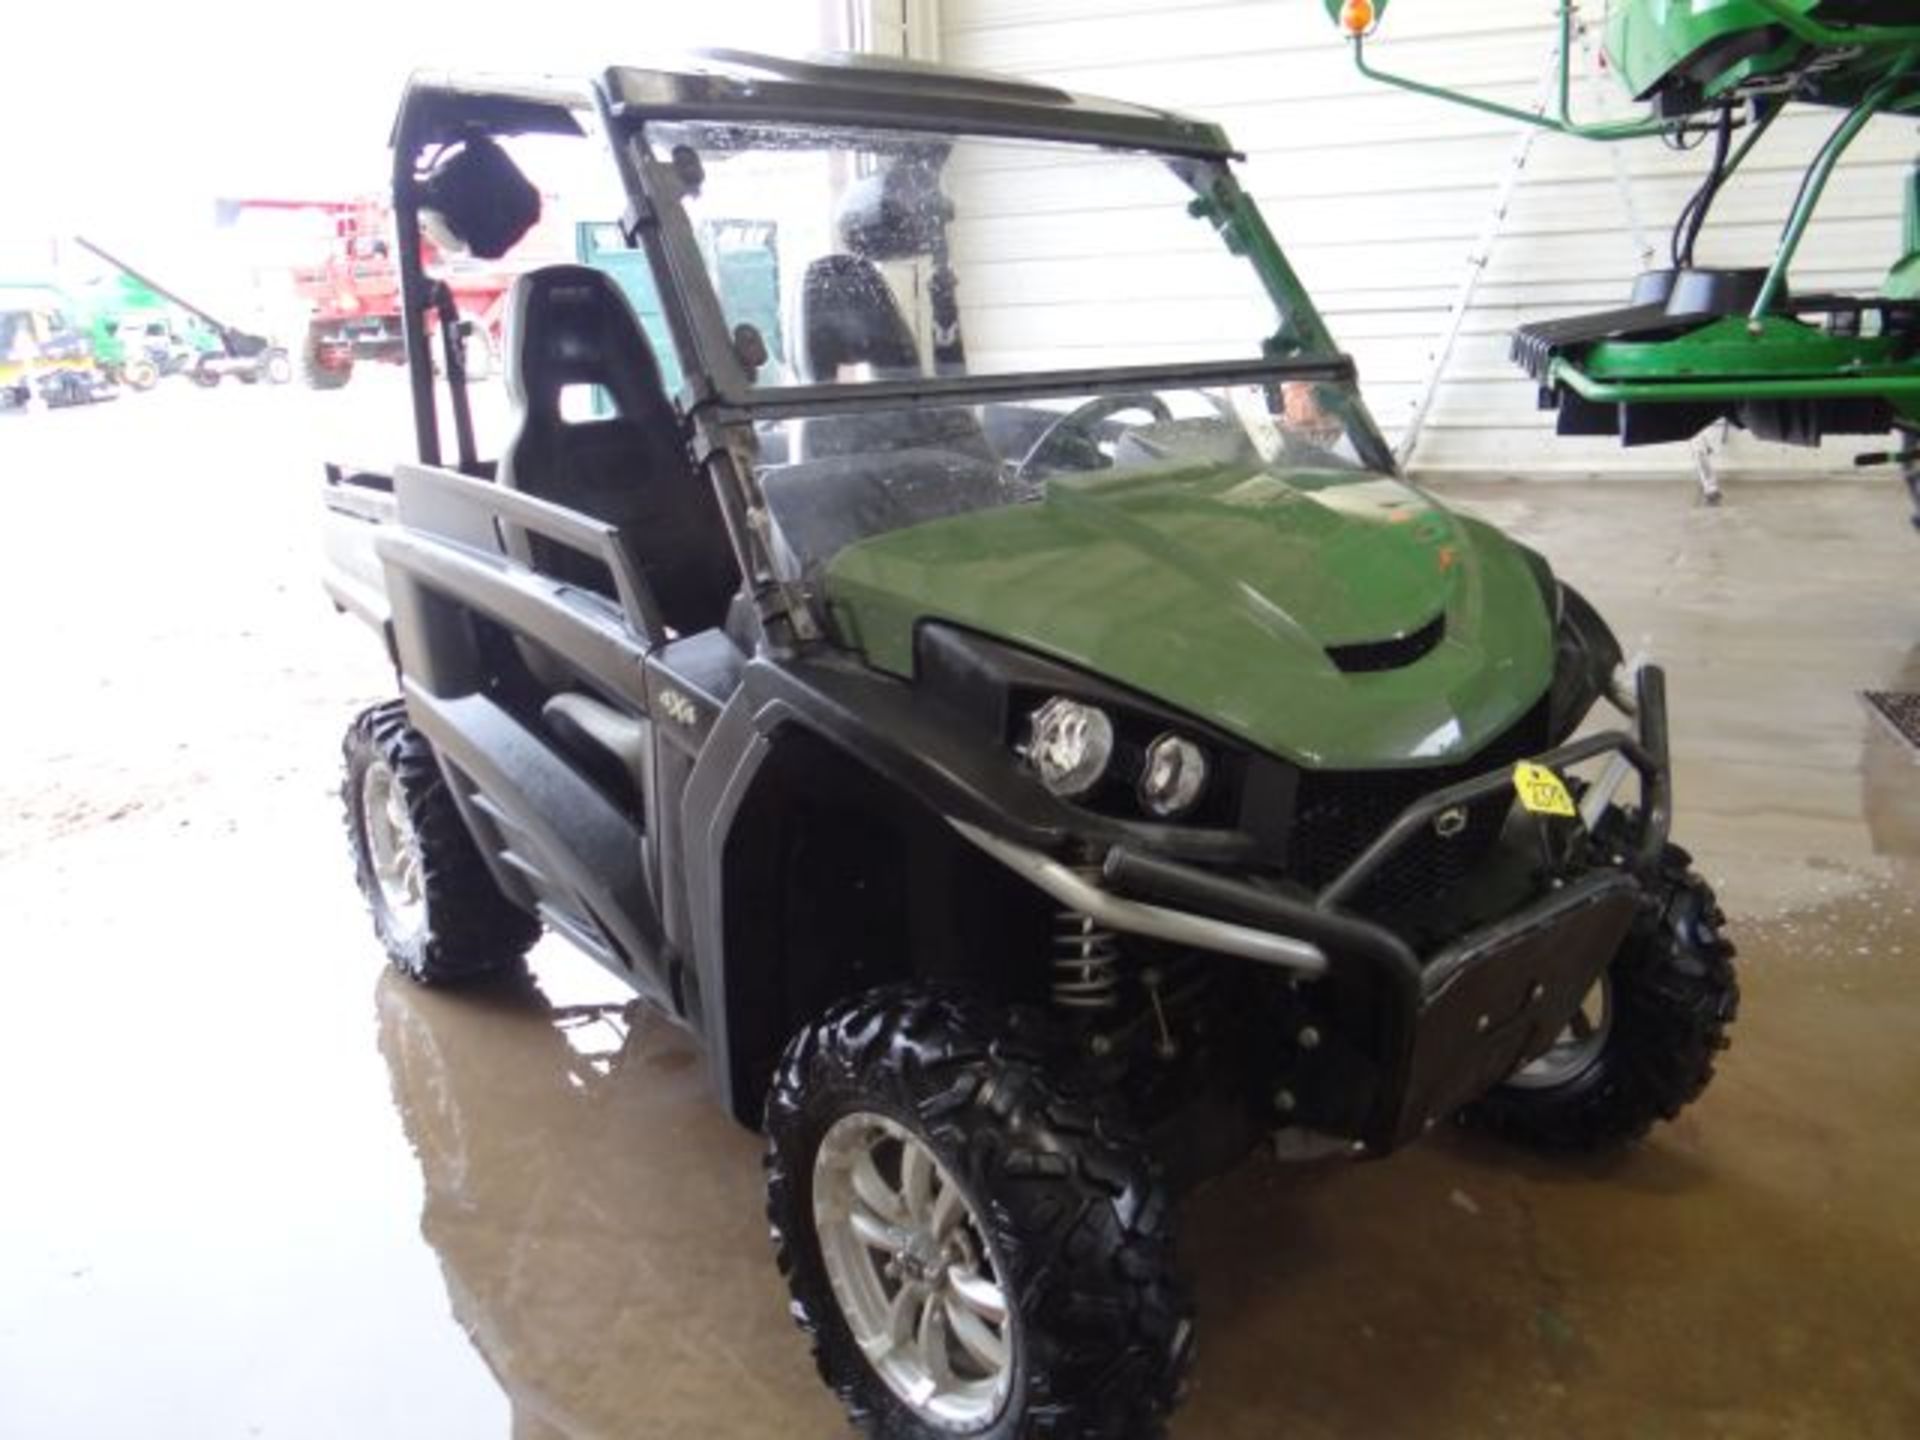 JD RSX850 Sport Gator, 2013 Marine Stereo System, All Maintenance Done at Sydenstrickers, No Title